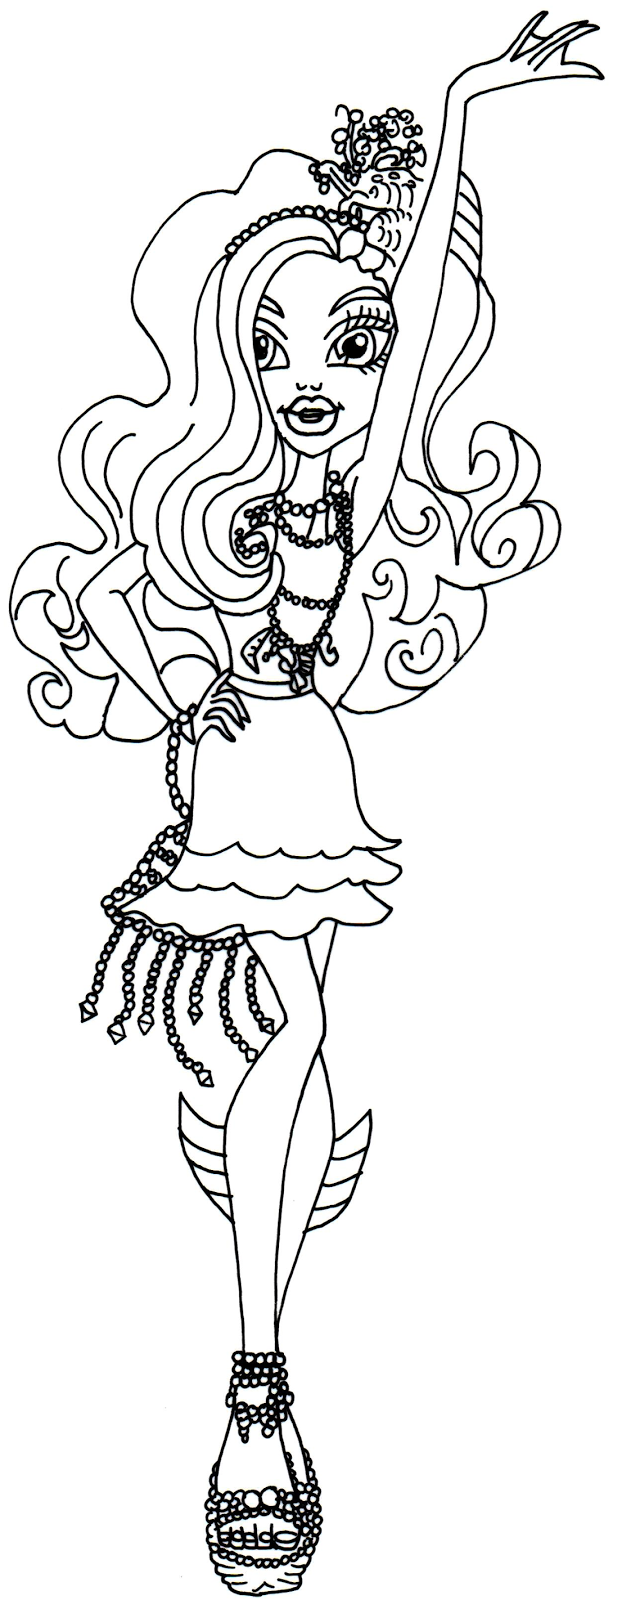 Download Free Printable Monster High Coloring Pages: Lagoona Blue Black Carpet Monster High Coloring Page